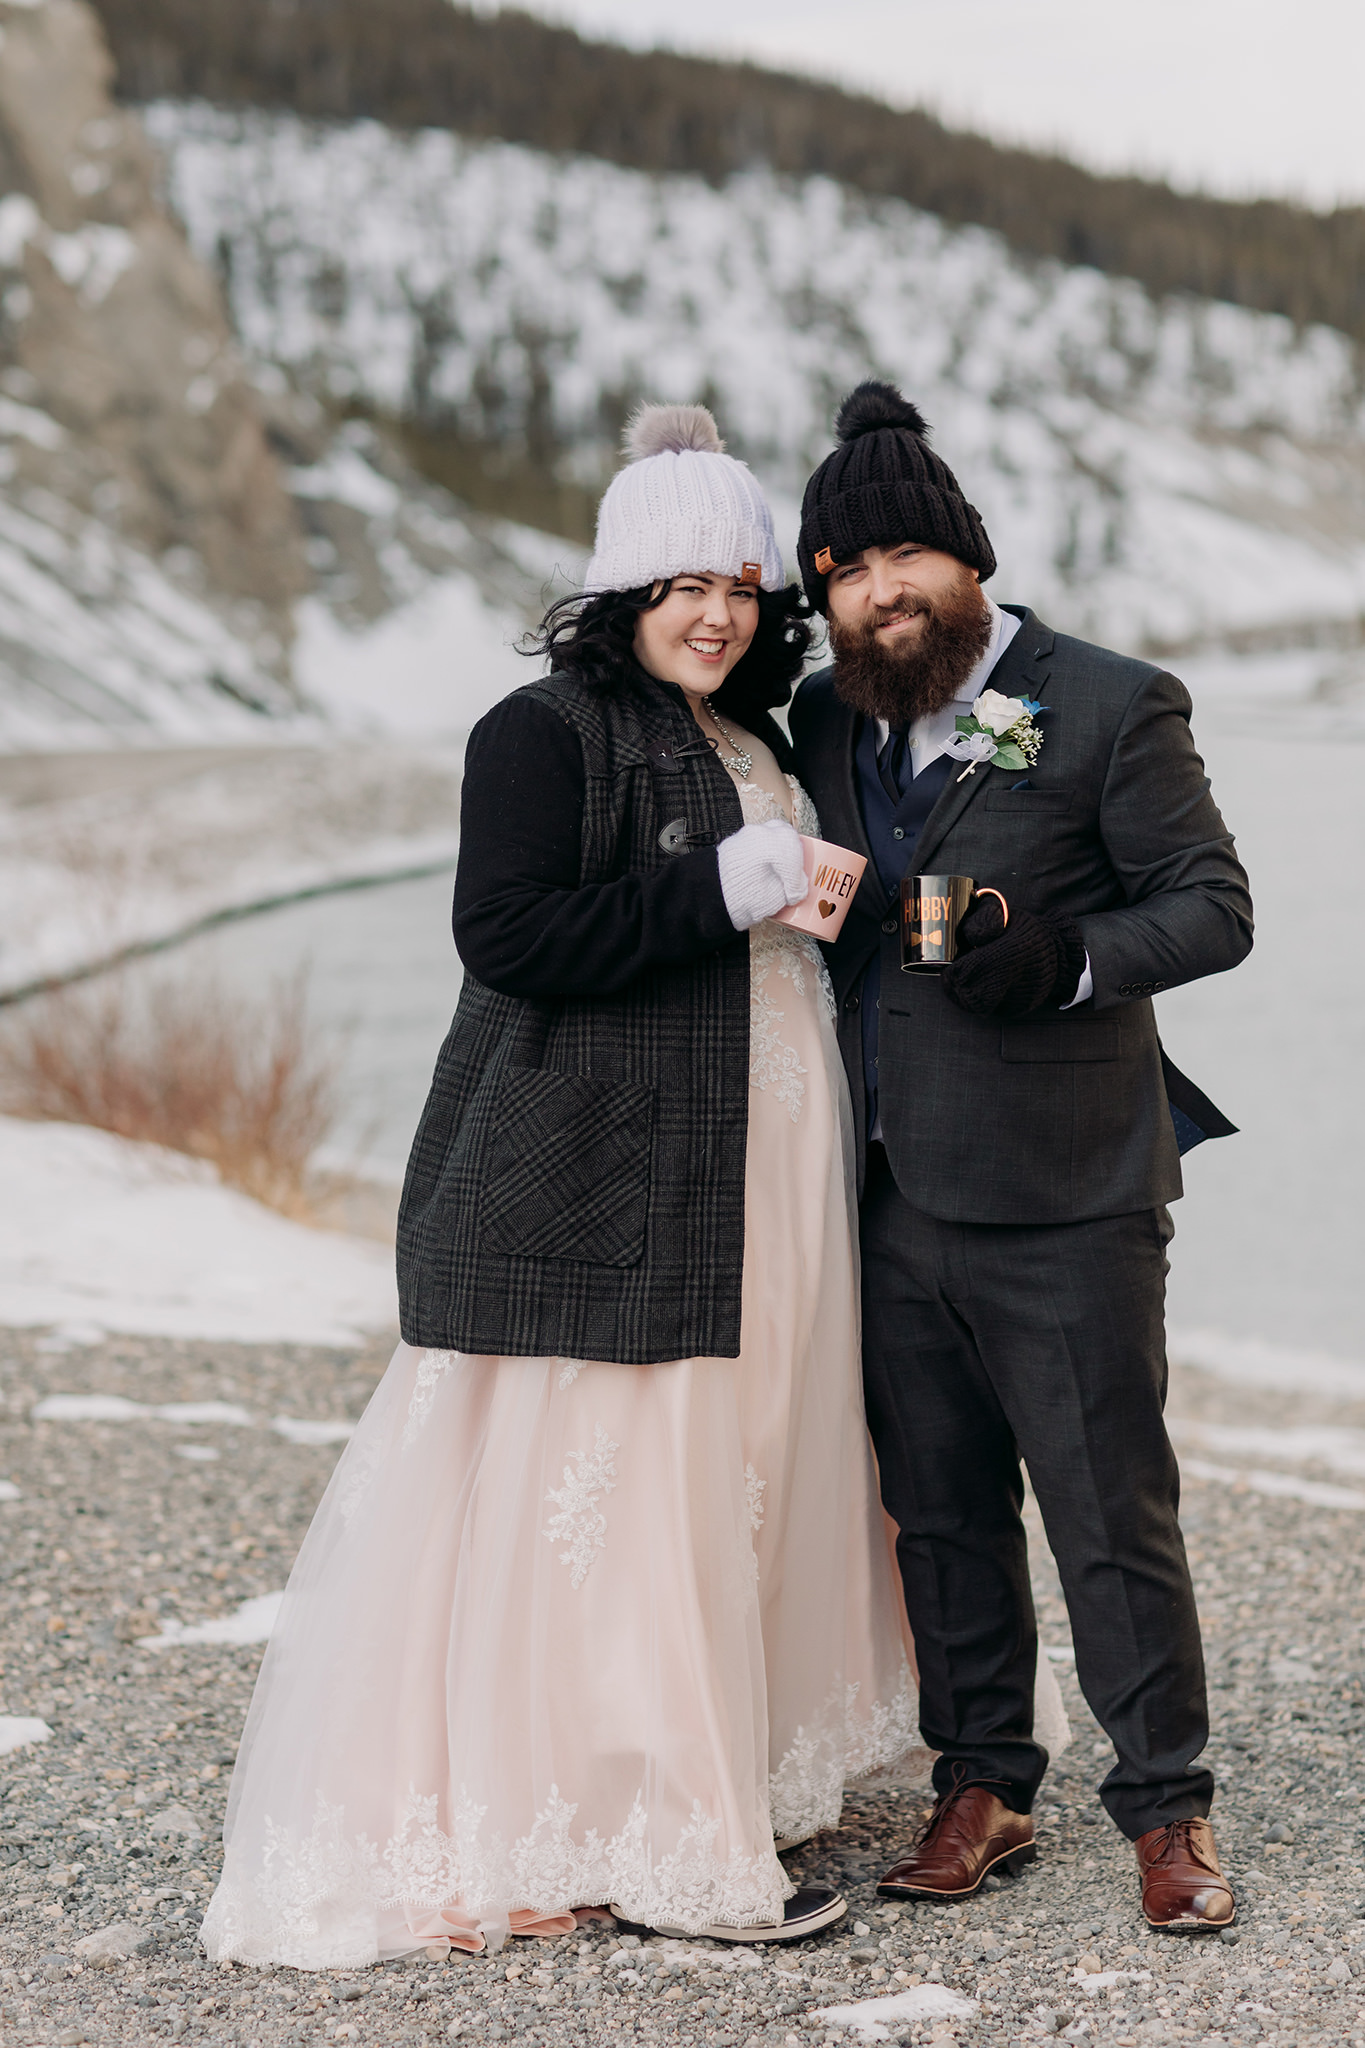 Falcon Crest Lodge wedding Canmore winter wedding photos bride & groom at Goat Pond in Kananaskis photographed by ENV Photography woolen hats mittens hubby wifey mugs